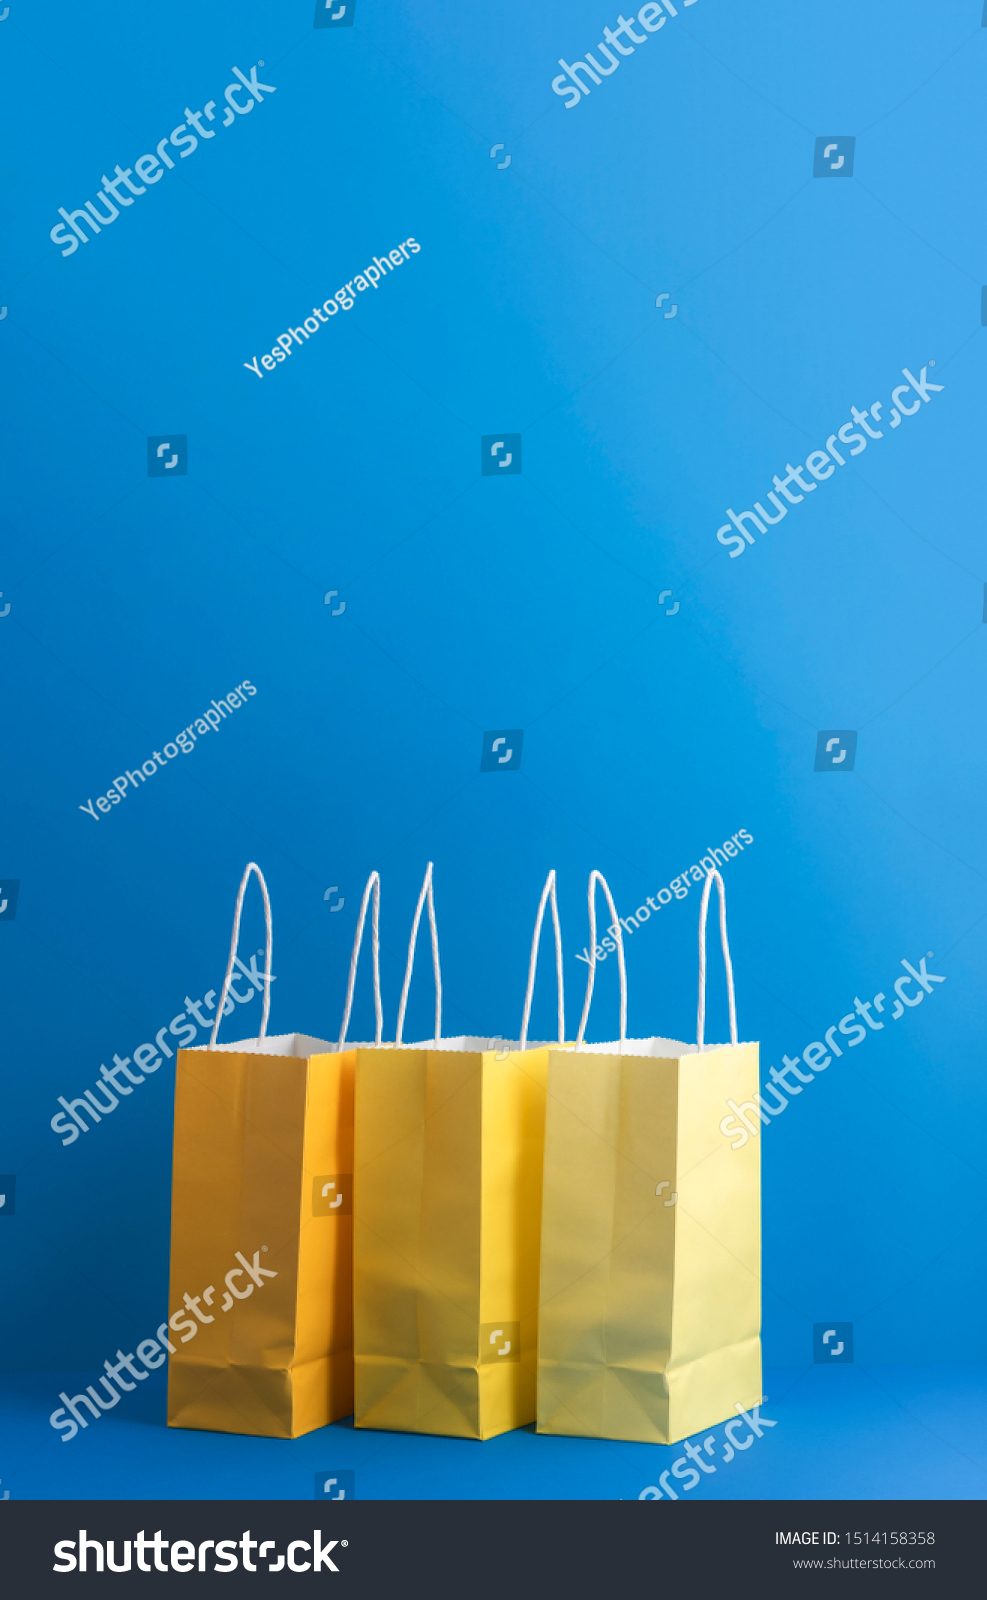 Download Three Yellow Paper Bags On Blue Business Finance Stock Image 1514158358 Yellowimages Mockups